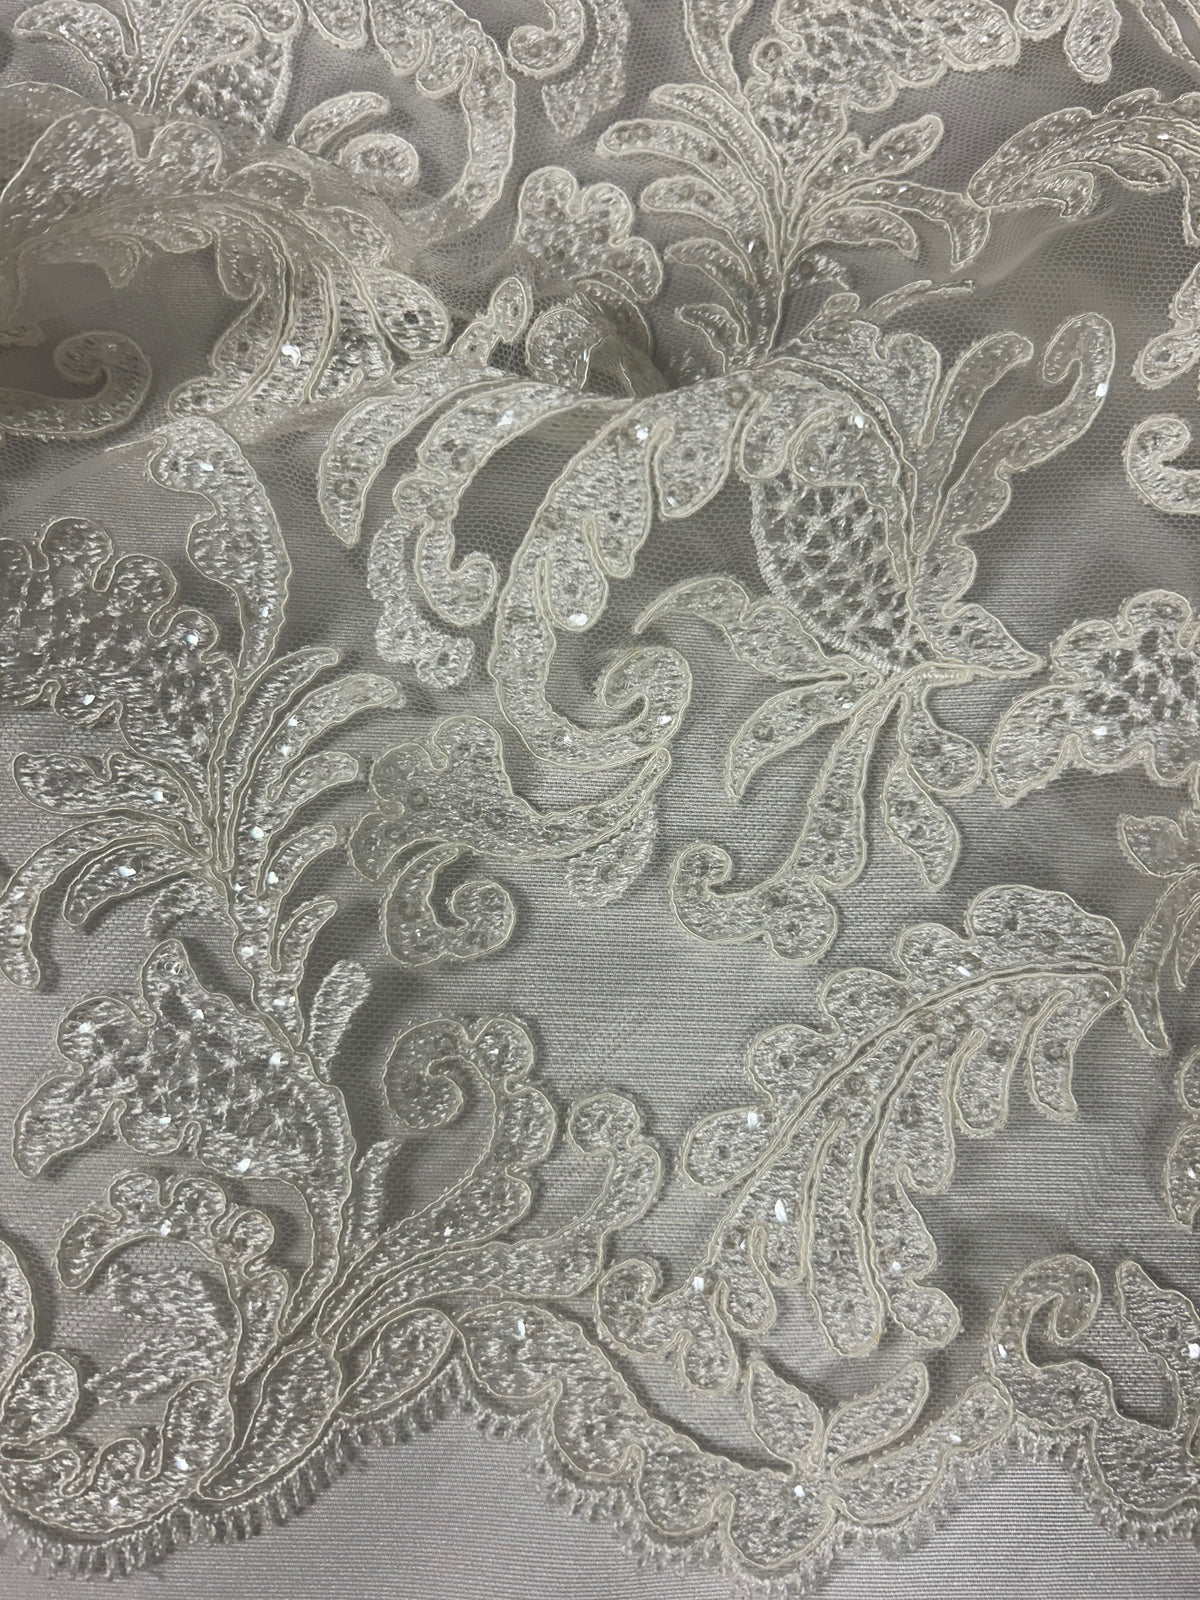 Ivory Corded Lace - Hermione